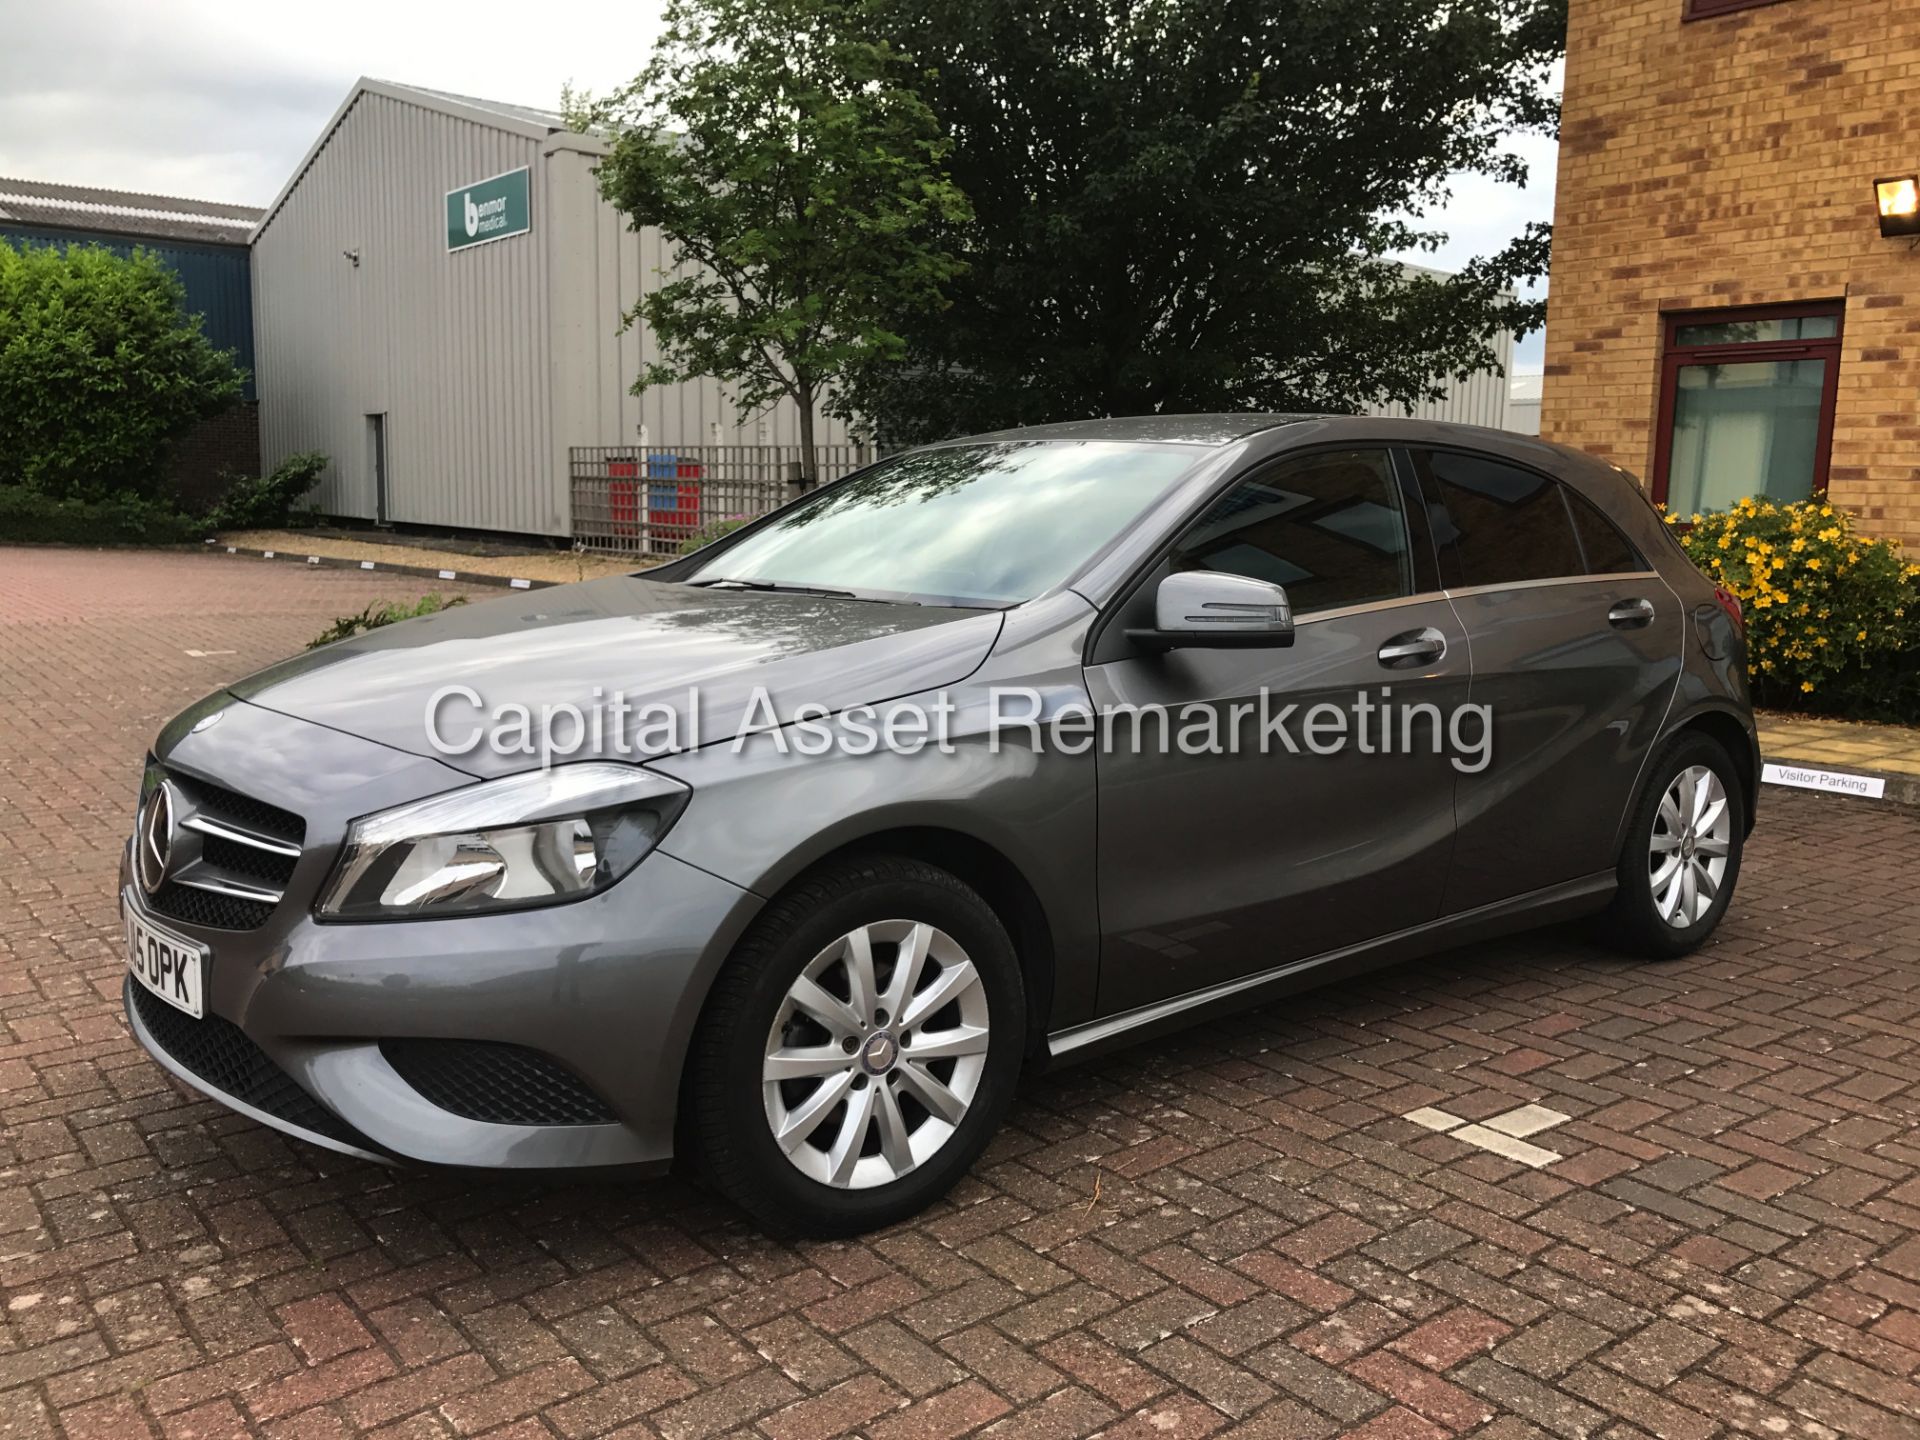 (ON SALE) MERCEDES A180d 7G TRONIC "15 REG" SAT NAV - 1 OWNER - PADDEL SHIFT - CRUISE - AIR CON - Image 3 of 22